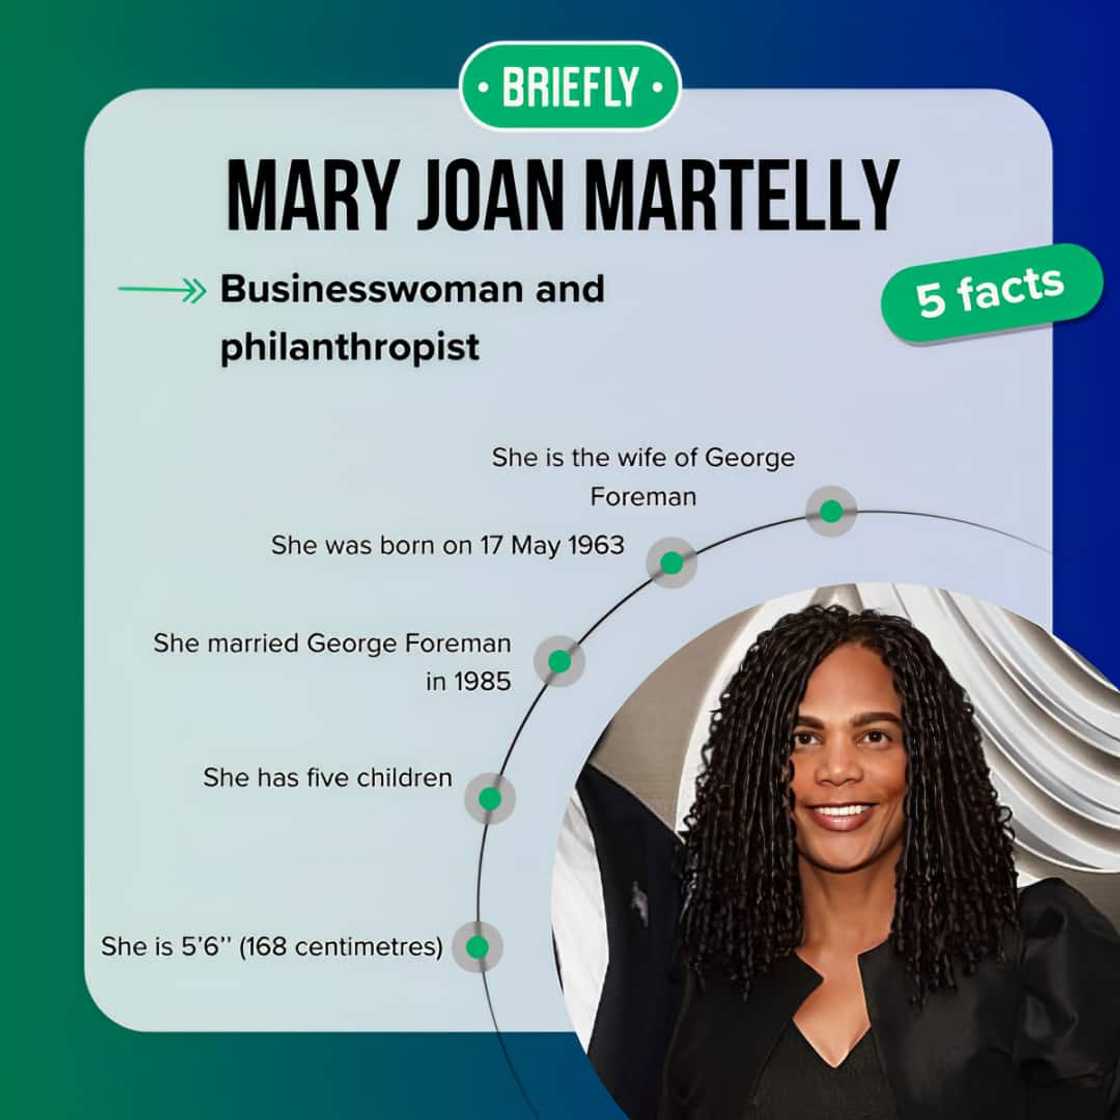 Fast facts about Mary Joan Martelly